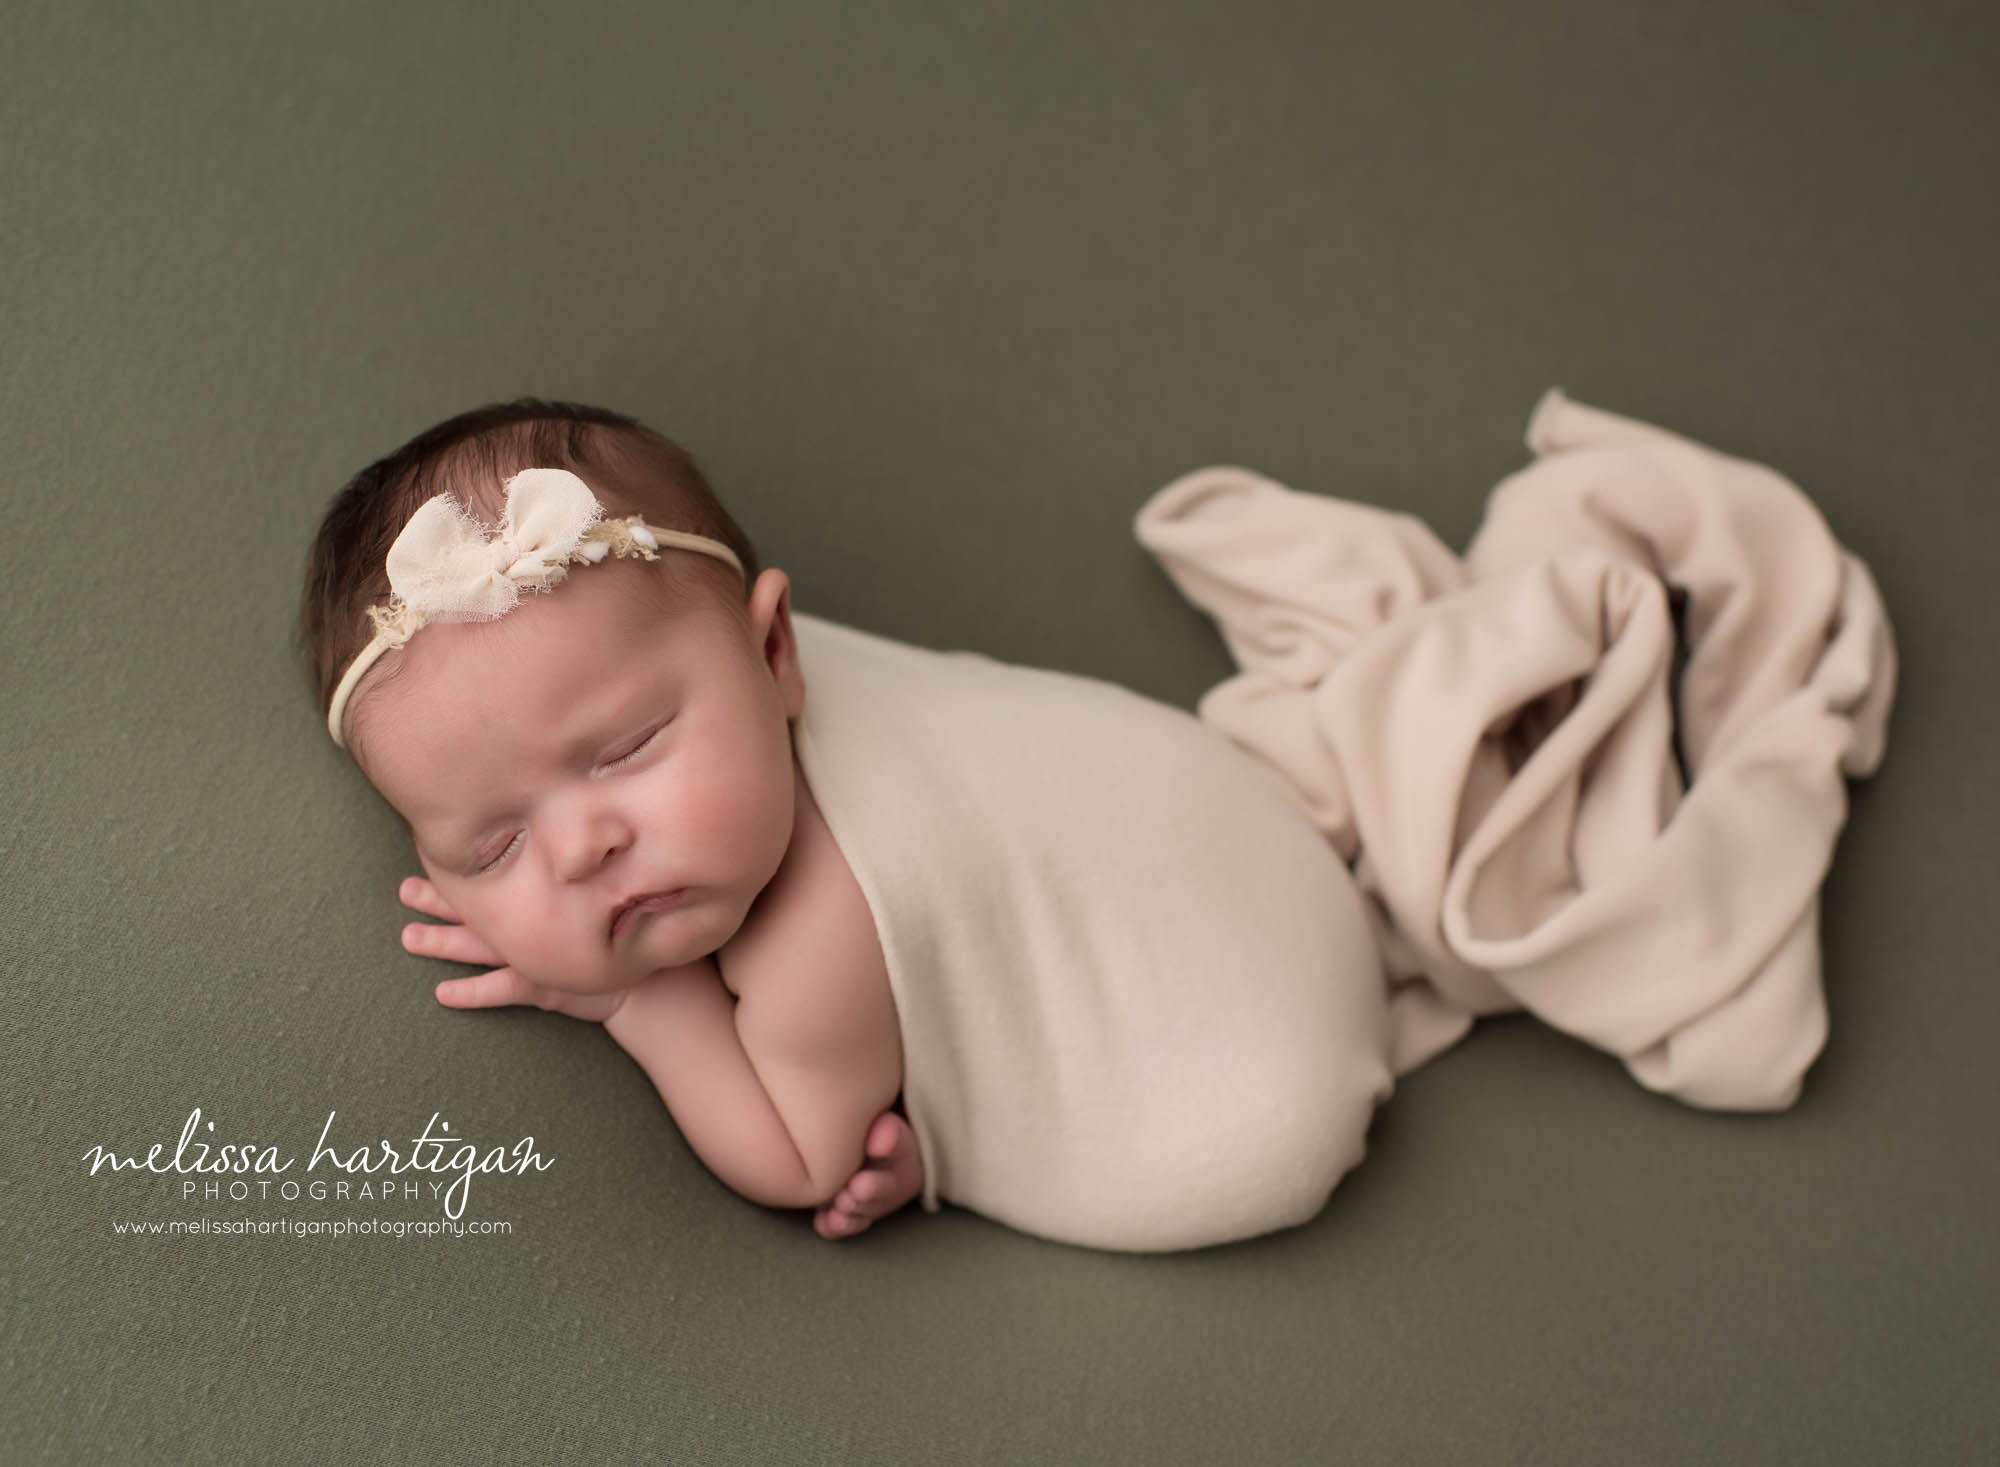 newborn baby girl posed on side wearing cream bow headband and cream fabric draped and tucked under her sleeping peacefully